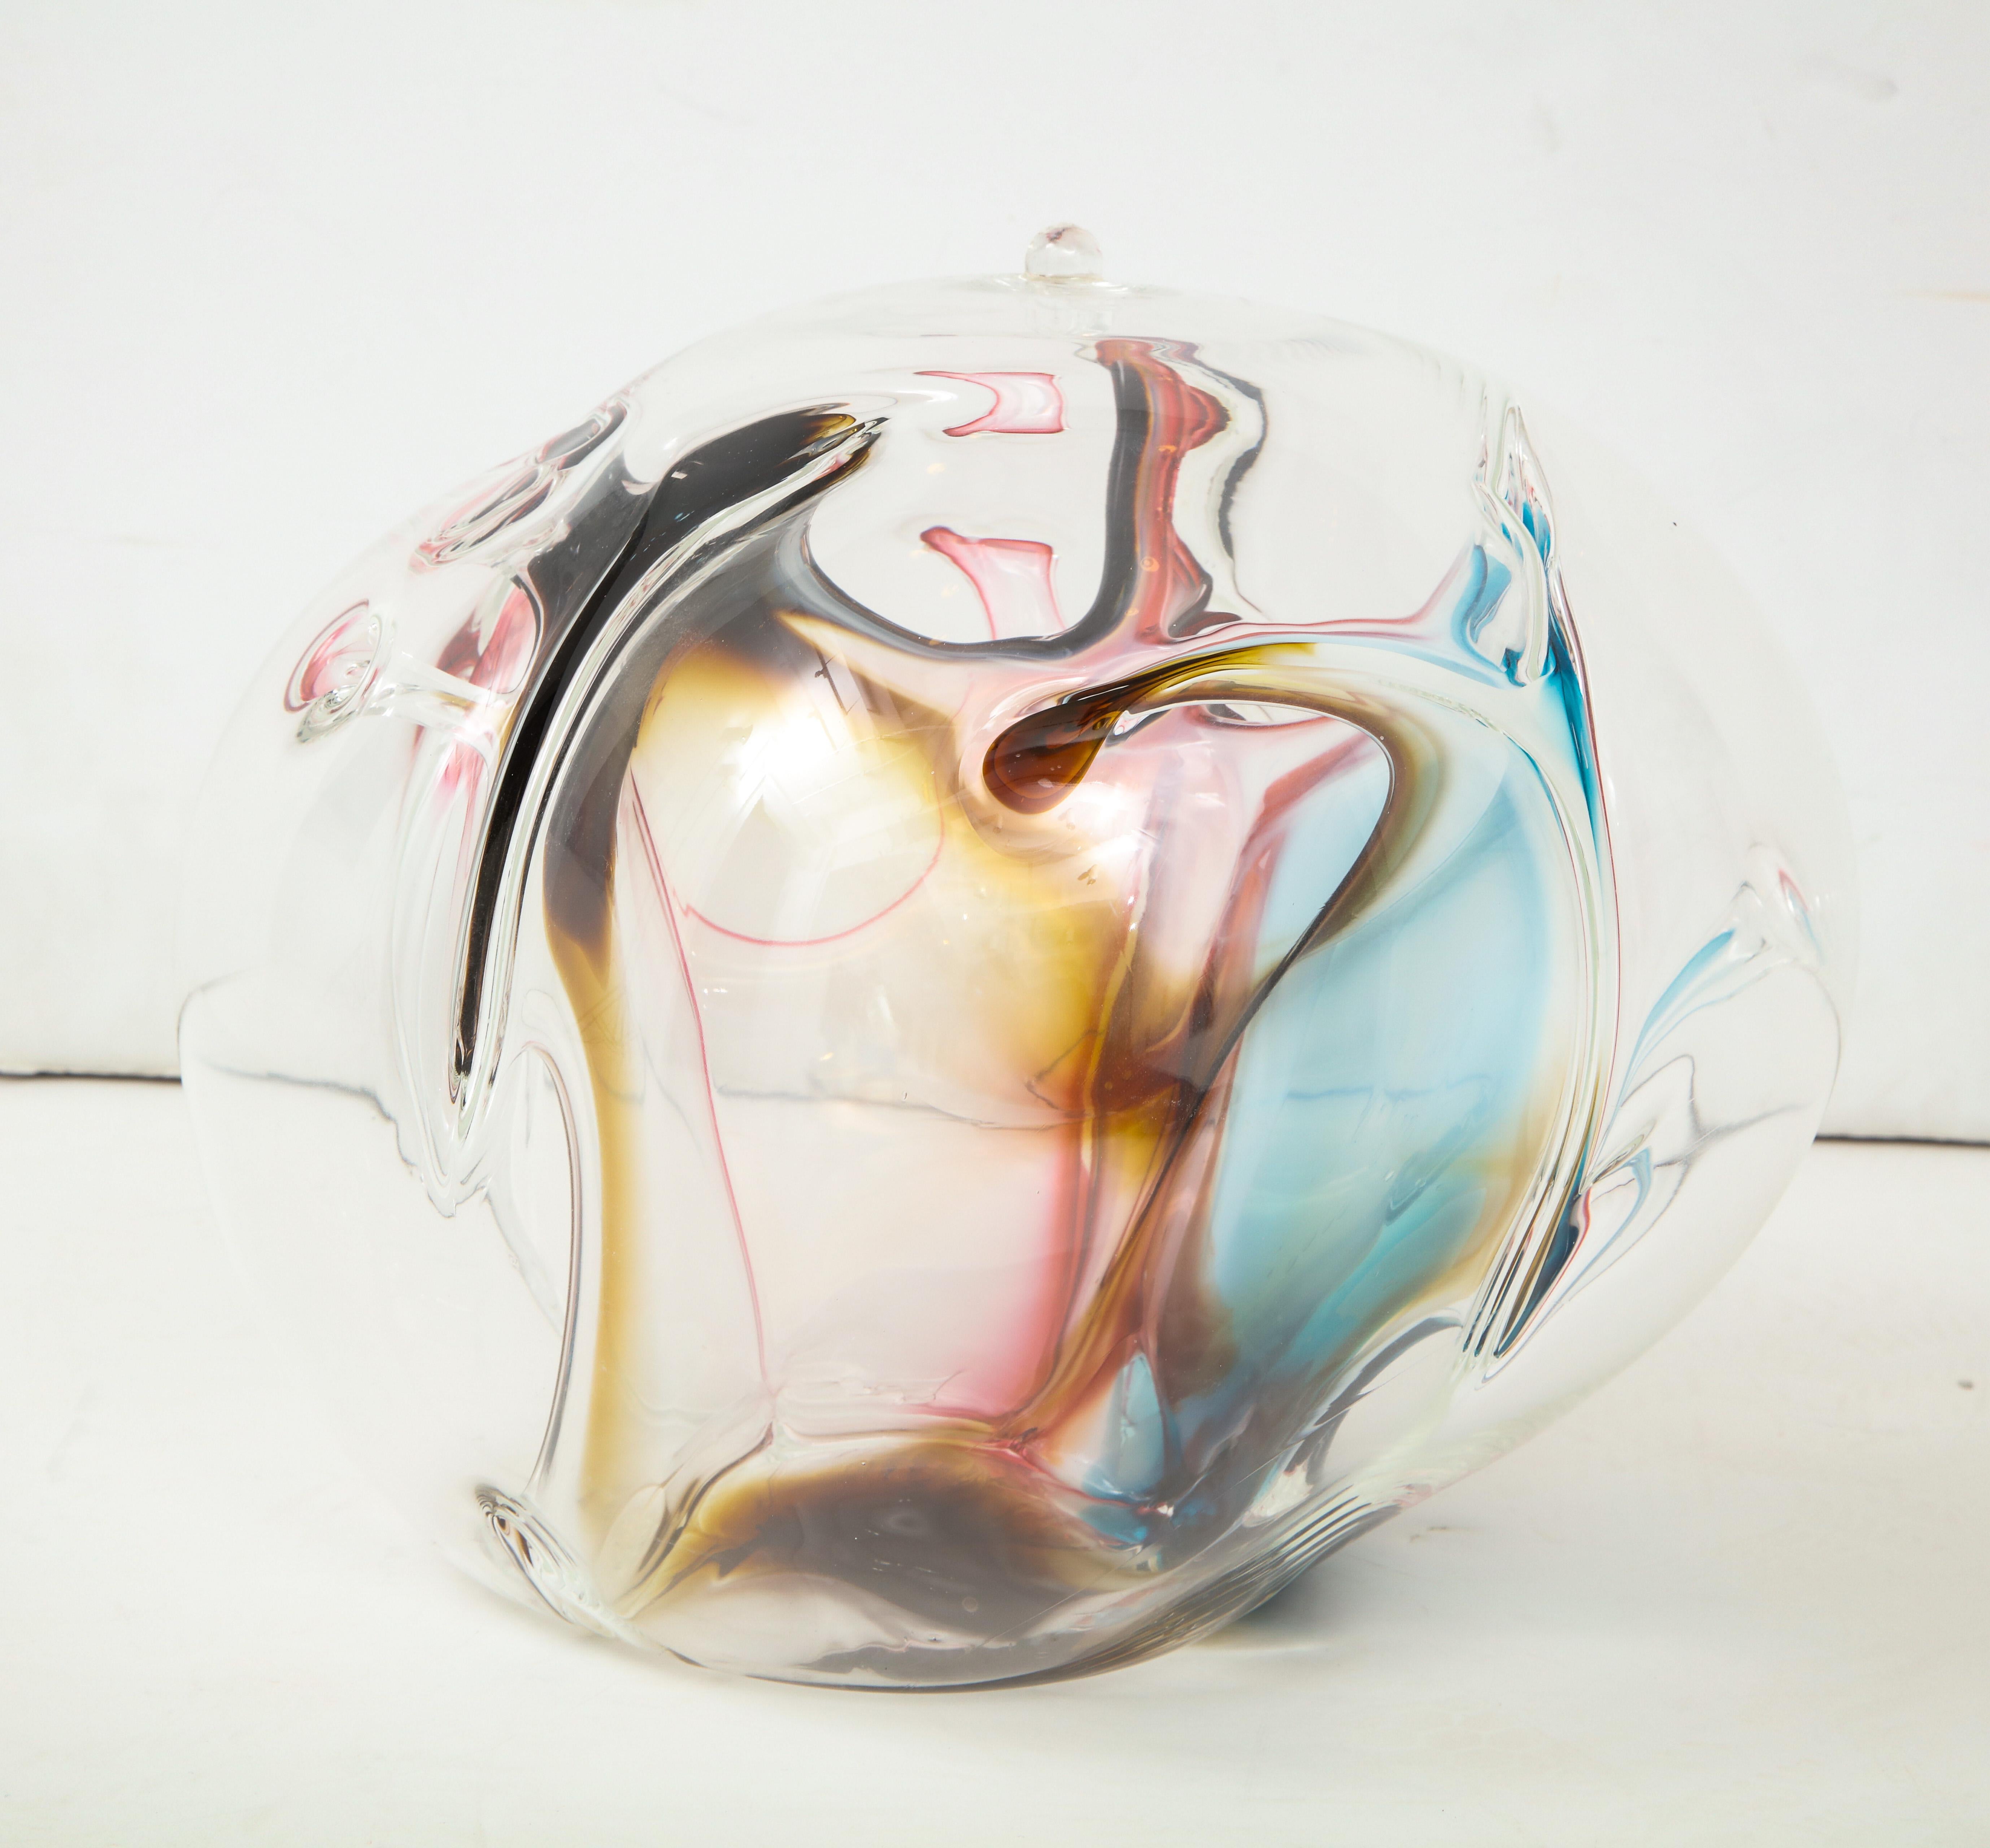 Multi-color hand blown glass orb sculpture with internal threads of blue, rose, amber and dark brown. Signed on bottom.